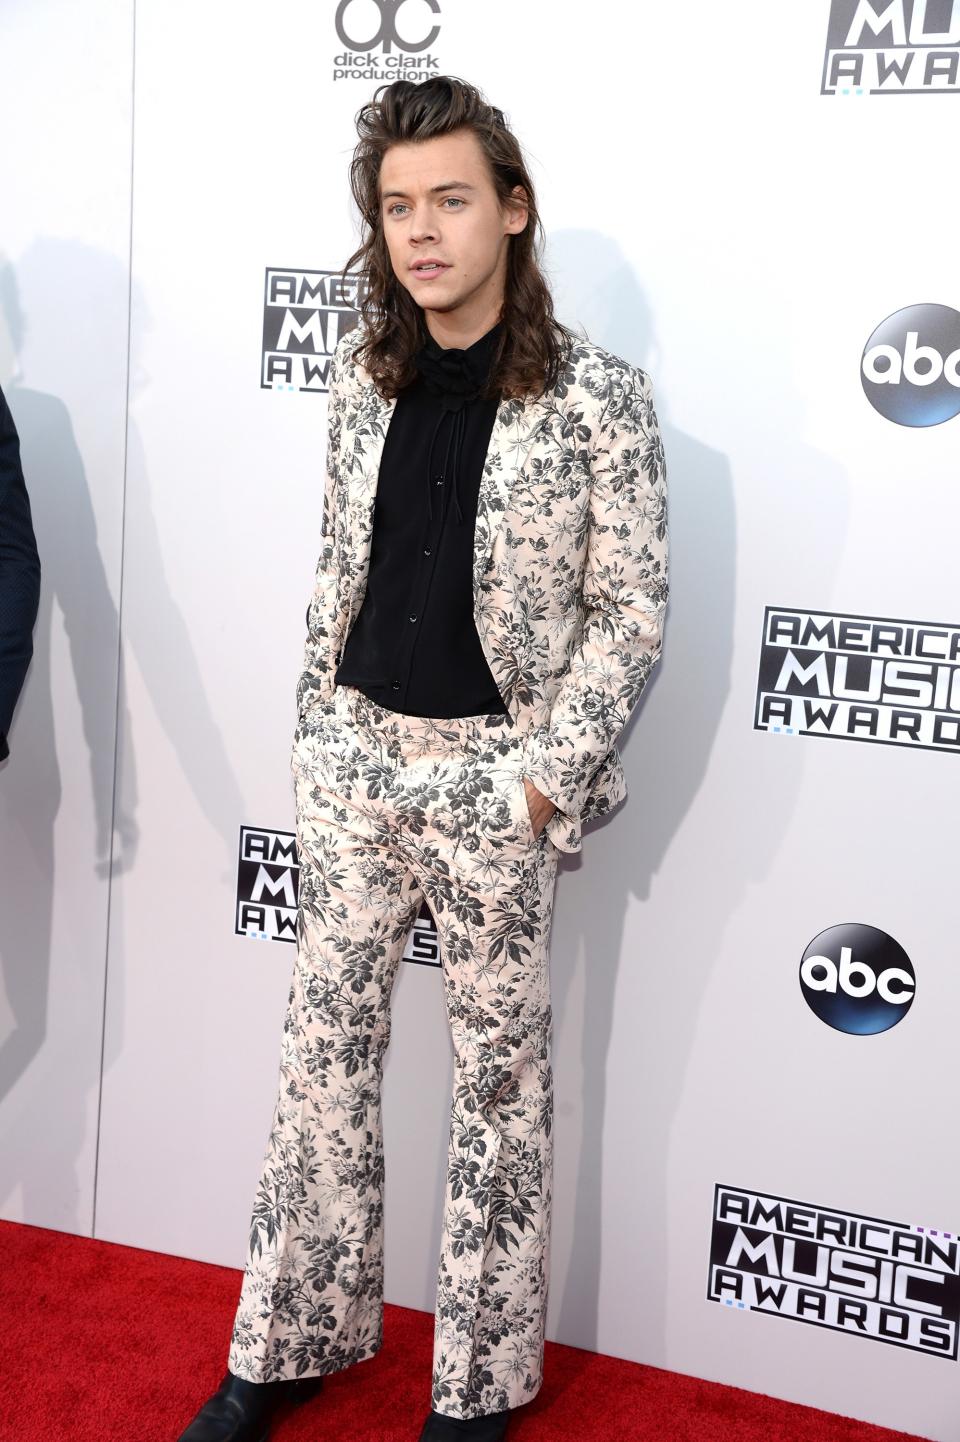 Printed suits? Check. Ruffled blouses? Double check. Harry Styles rules the red carpet in these campiest looks.